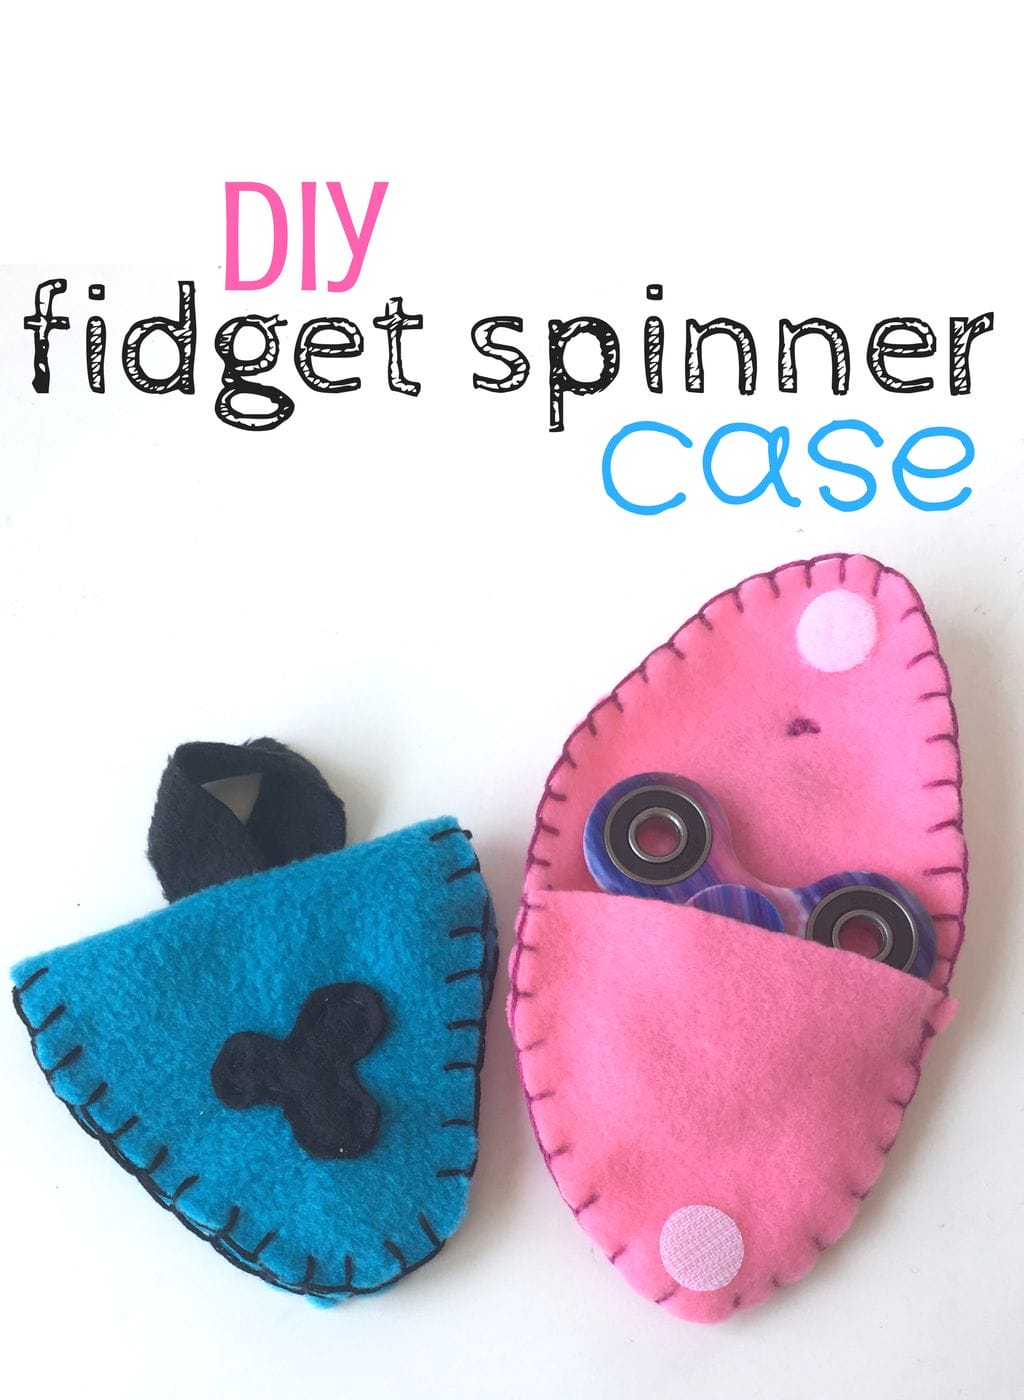 A blue and Pink felt case sewn together to make a Fidget spinner cases